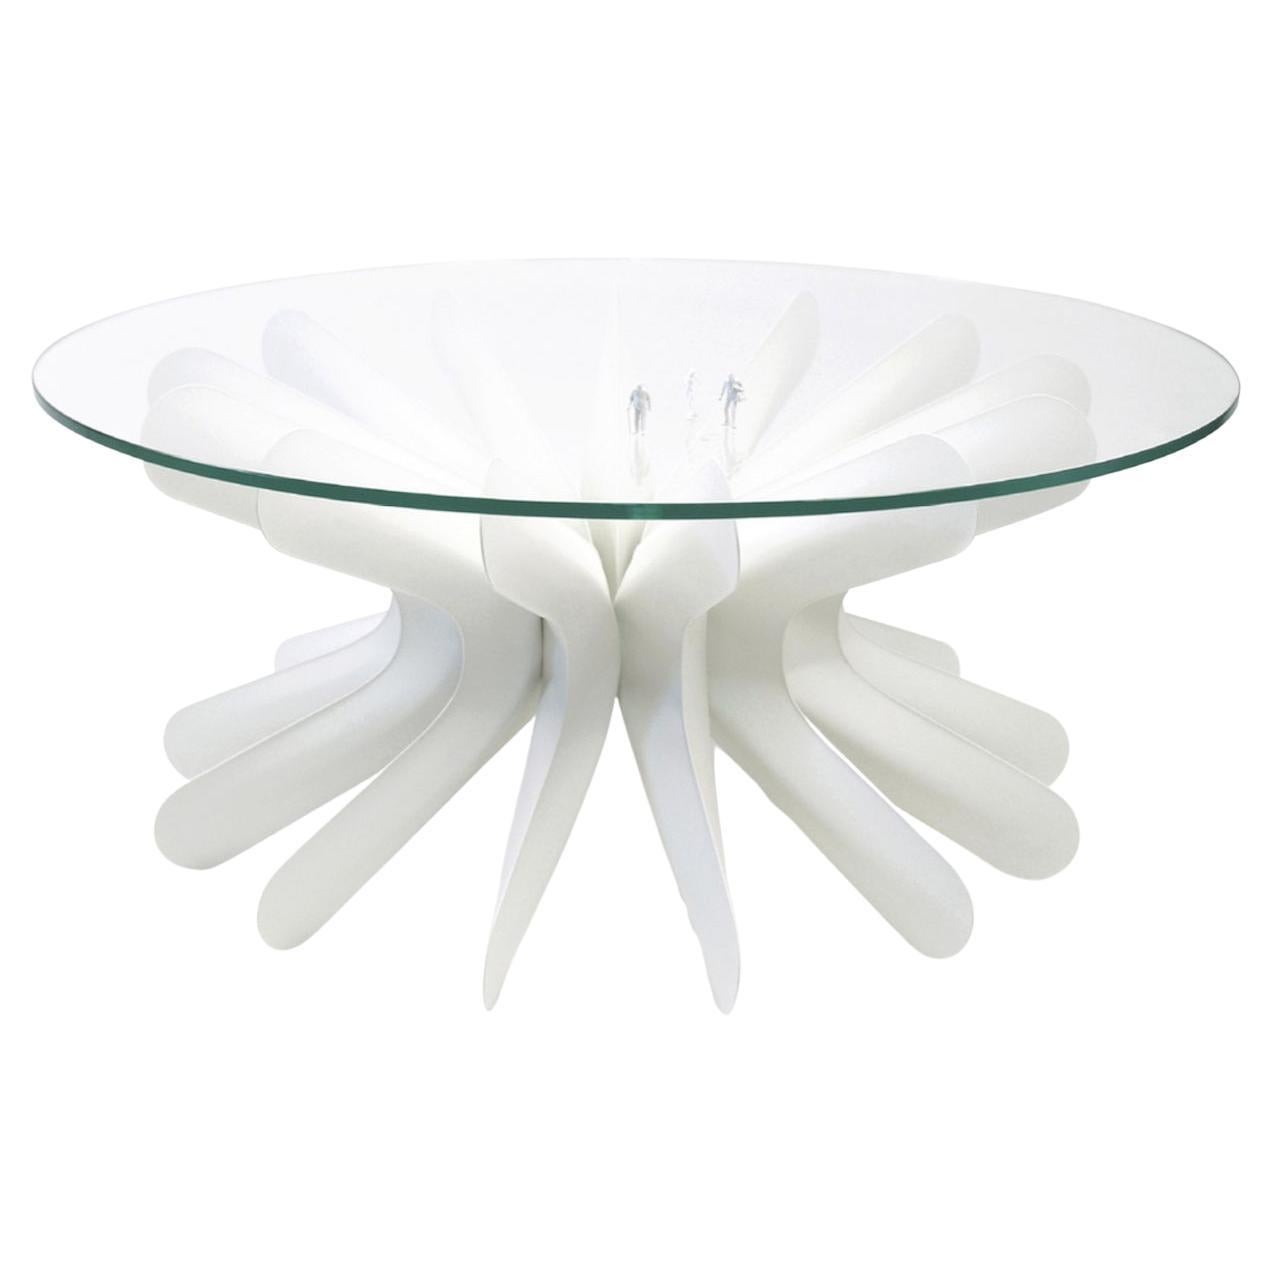 Contemporary Coffee Table 'Steel in Rotation No. 1' by Zieta, Small, White Matt For Sale